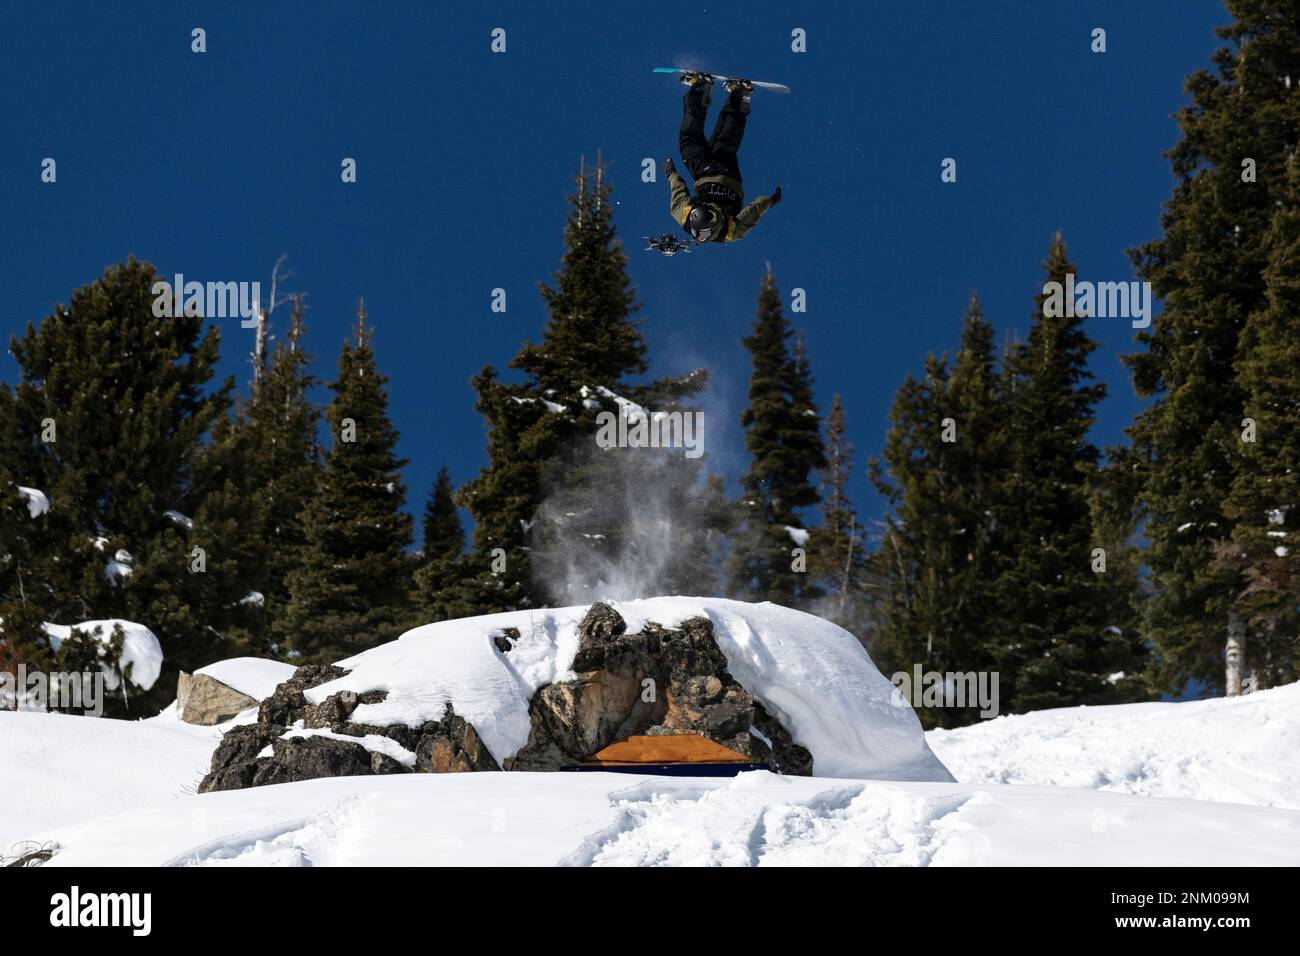 The innovative snowboard event, Natural Selection returns with spectacular powder action